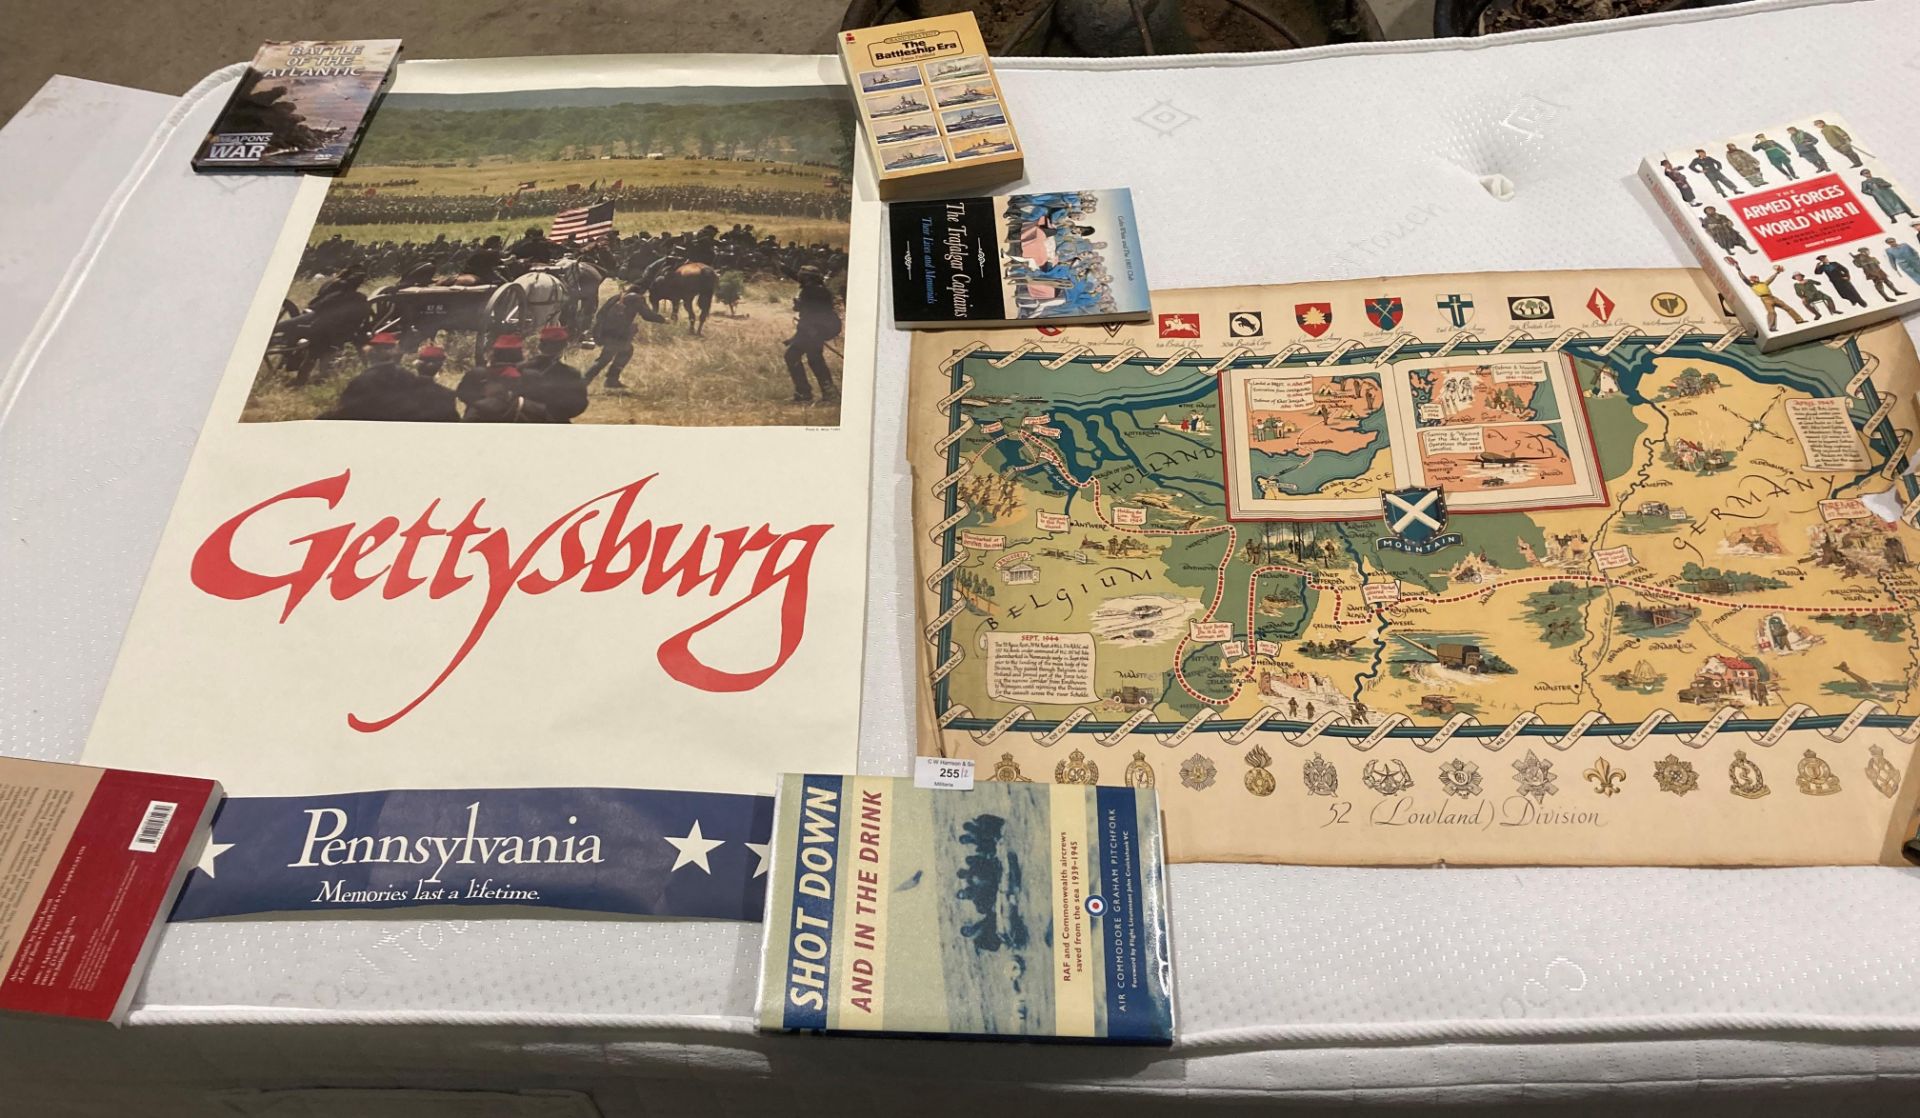 Two rolled up posters - modern Gettysburg American Civil War poster,